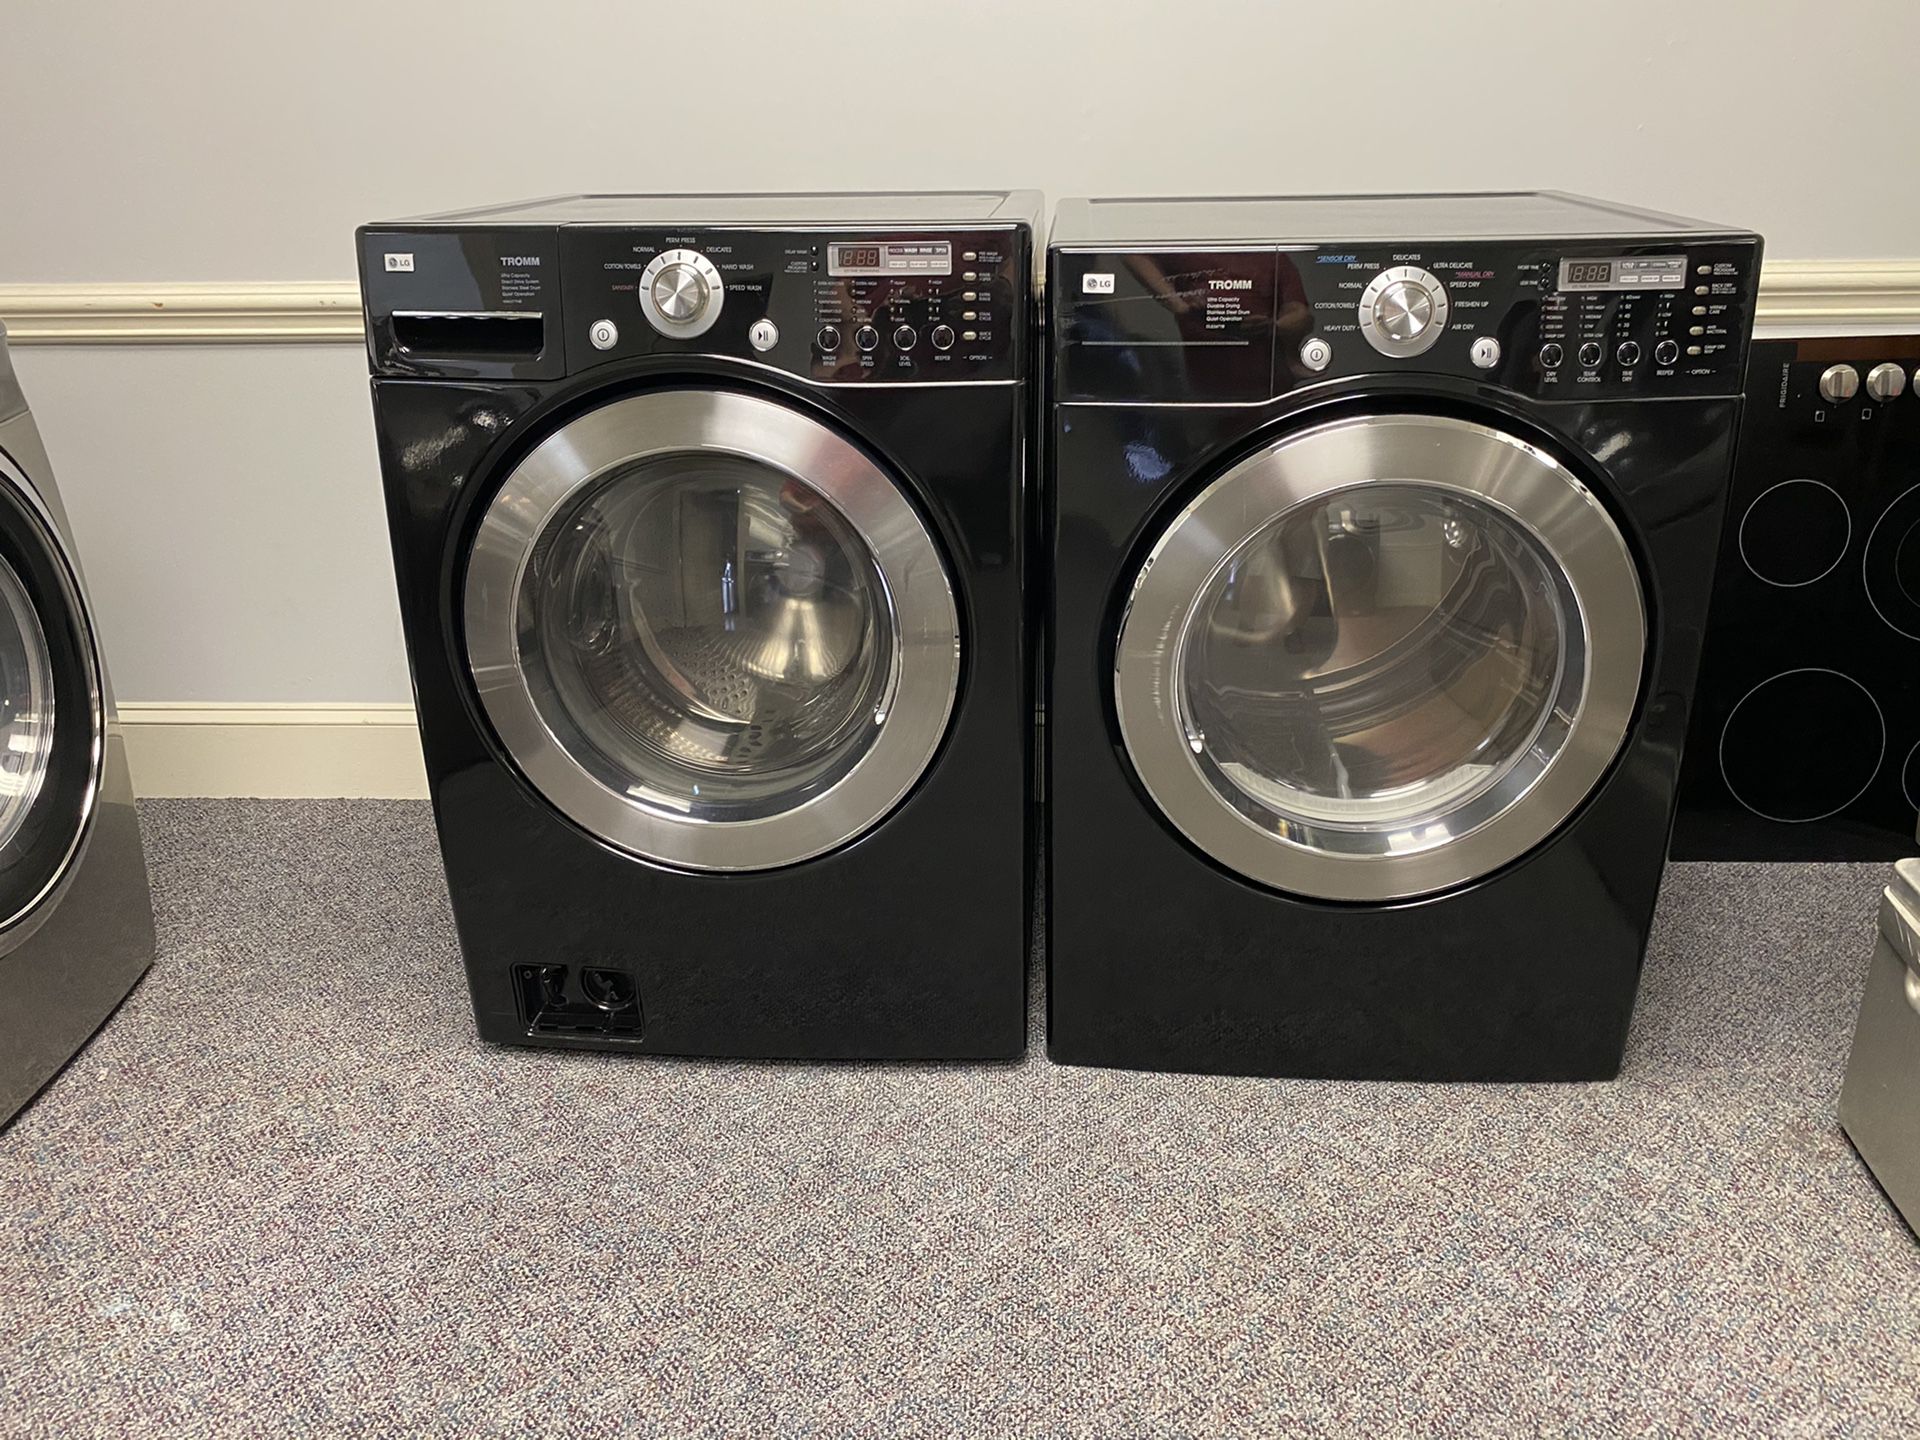 BLACK LG HIGH EFFICIENCY FRONT LOAD WASHER AND DRYER SET 4 MONTH WARRANTY